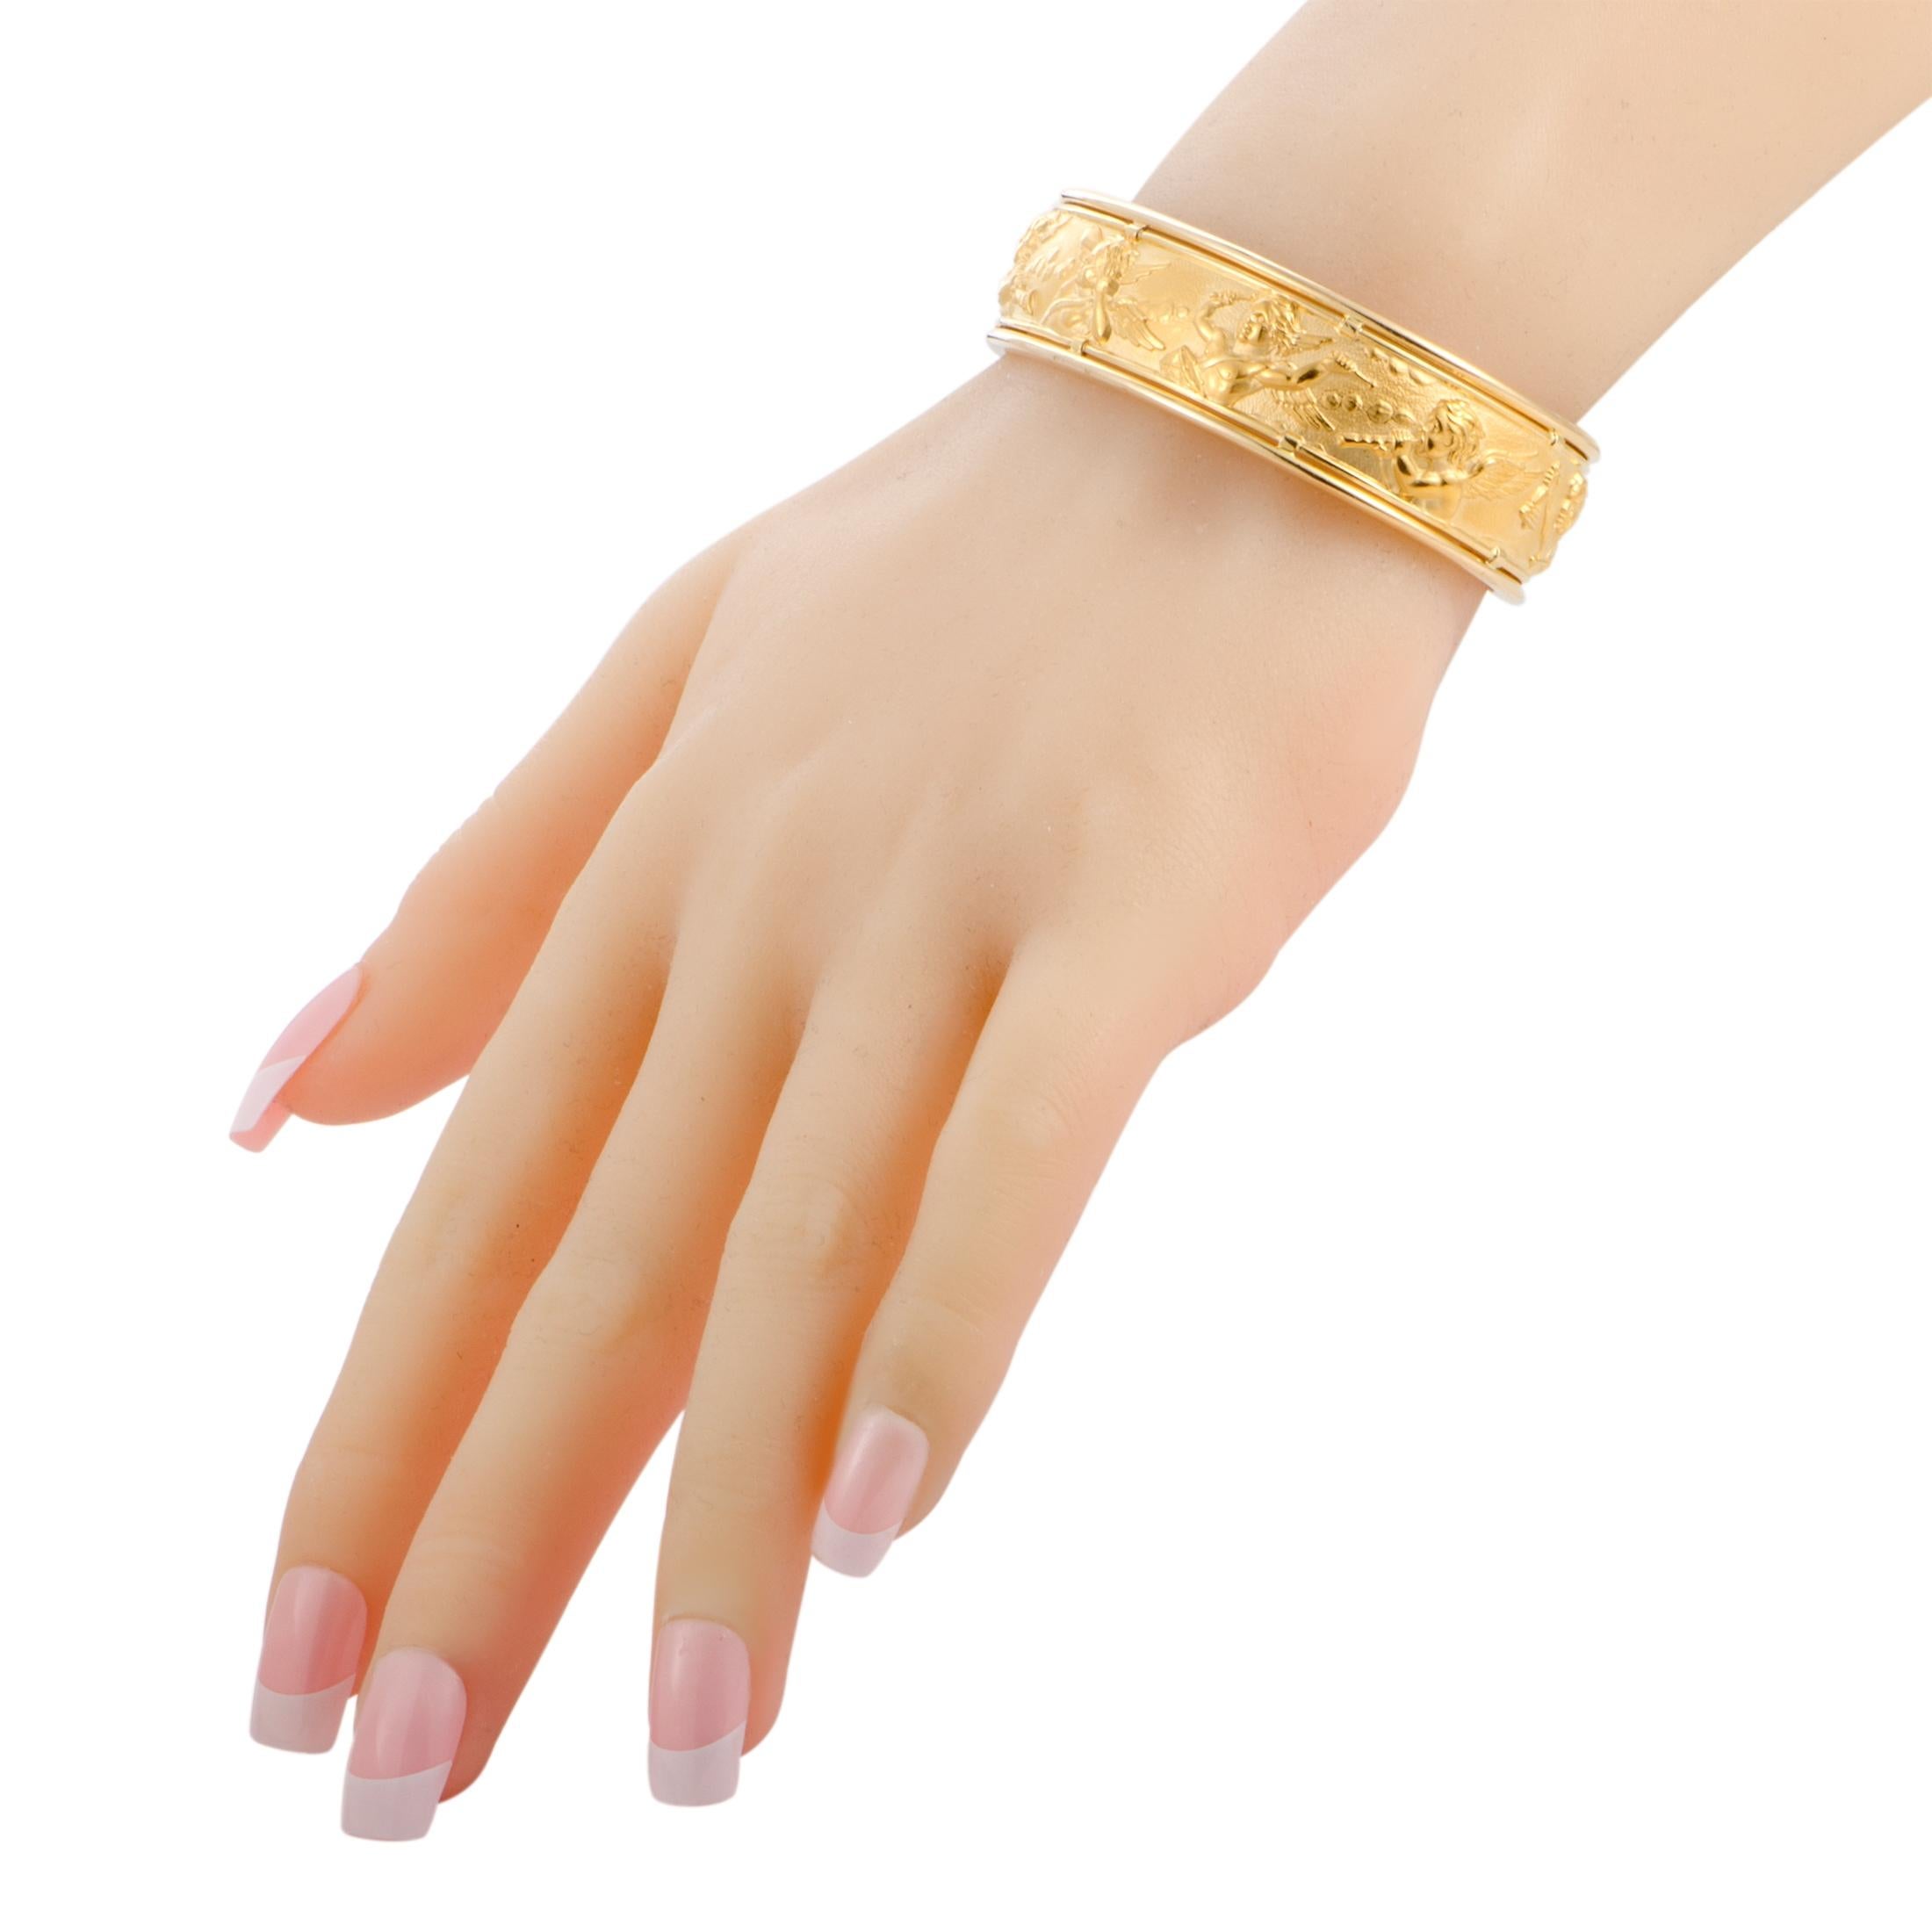 Antique allure and classic luxury are entwined in this marvelous Carrera y Carrera bracelet that boasts an exceptionally elegant  design splendidly accentuated by delightful angel motifs. The bracelet is beautifully crafted from 18K yellow gold and